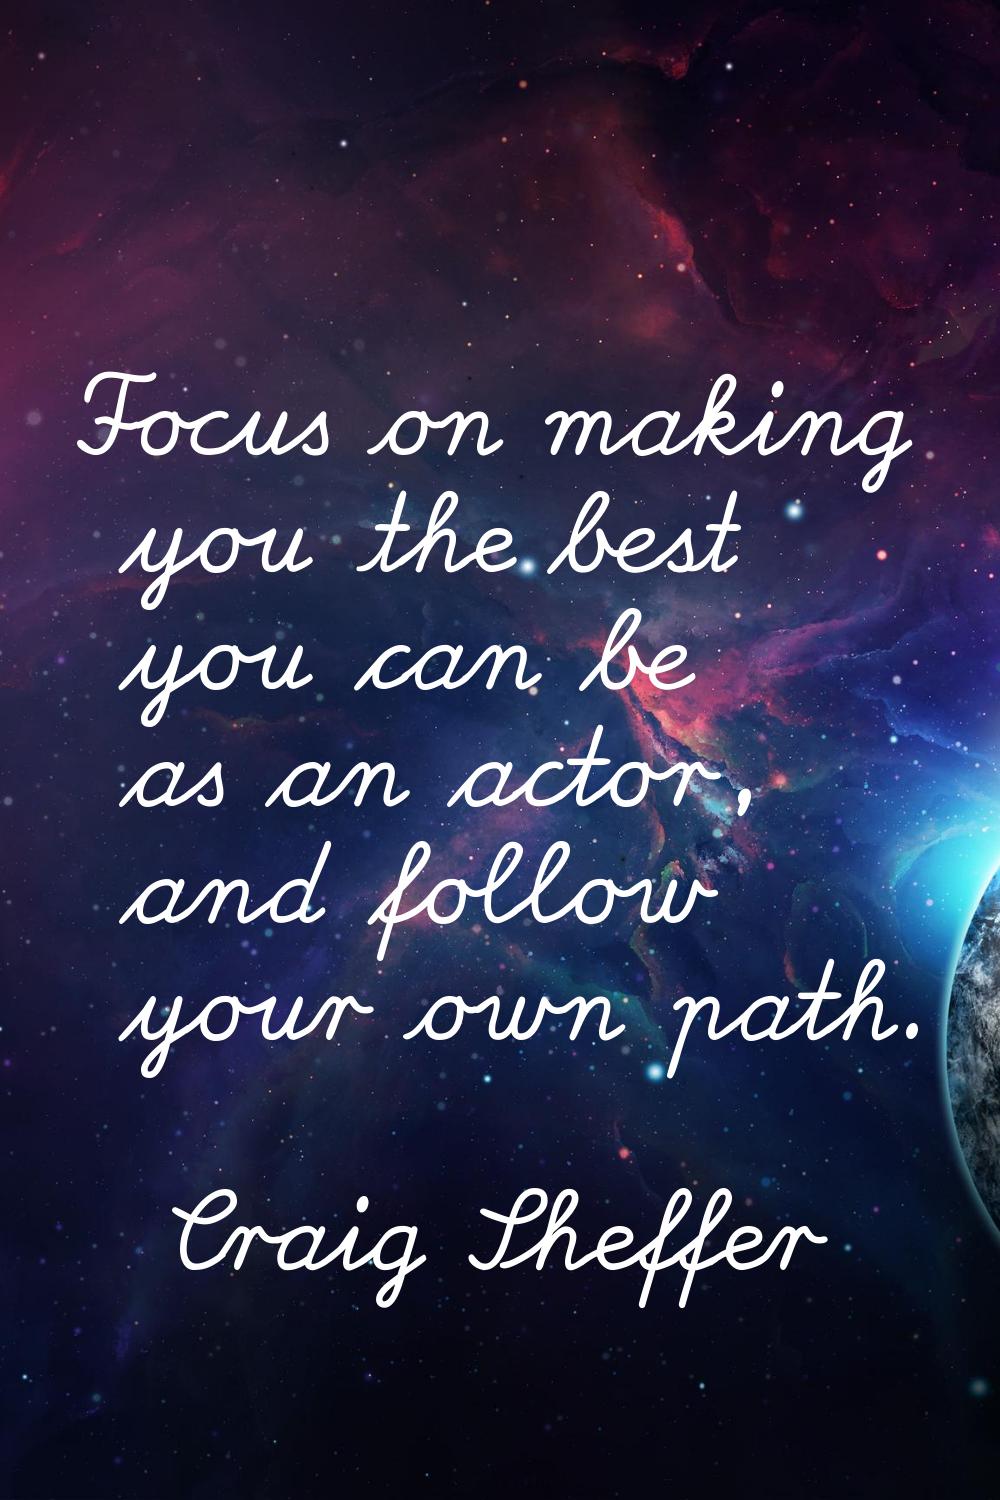 Focus on making you the best you can be as an actor, and follow your own path.